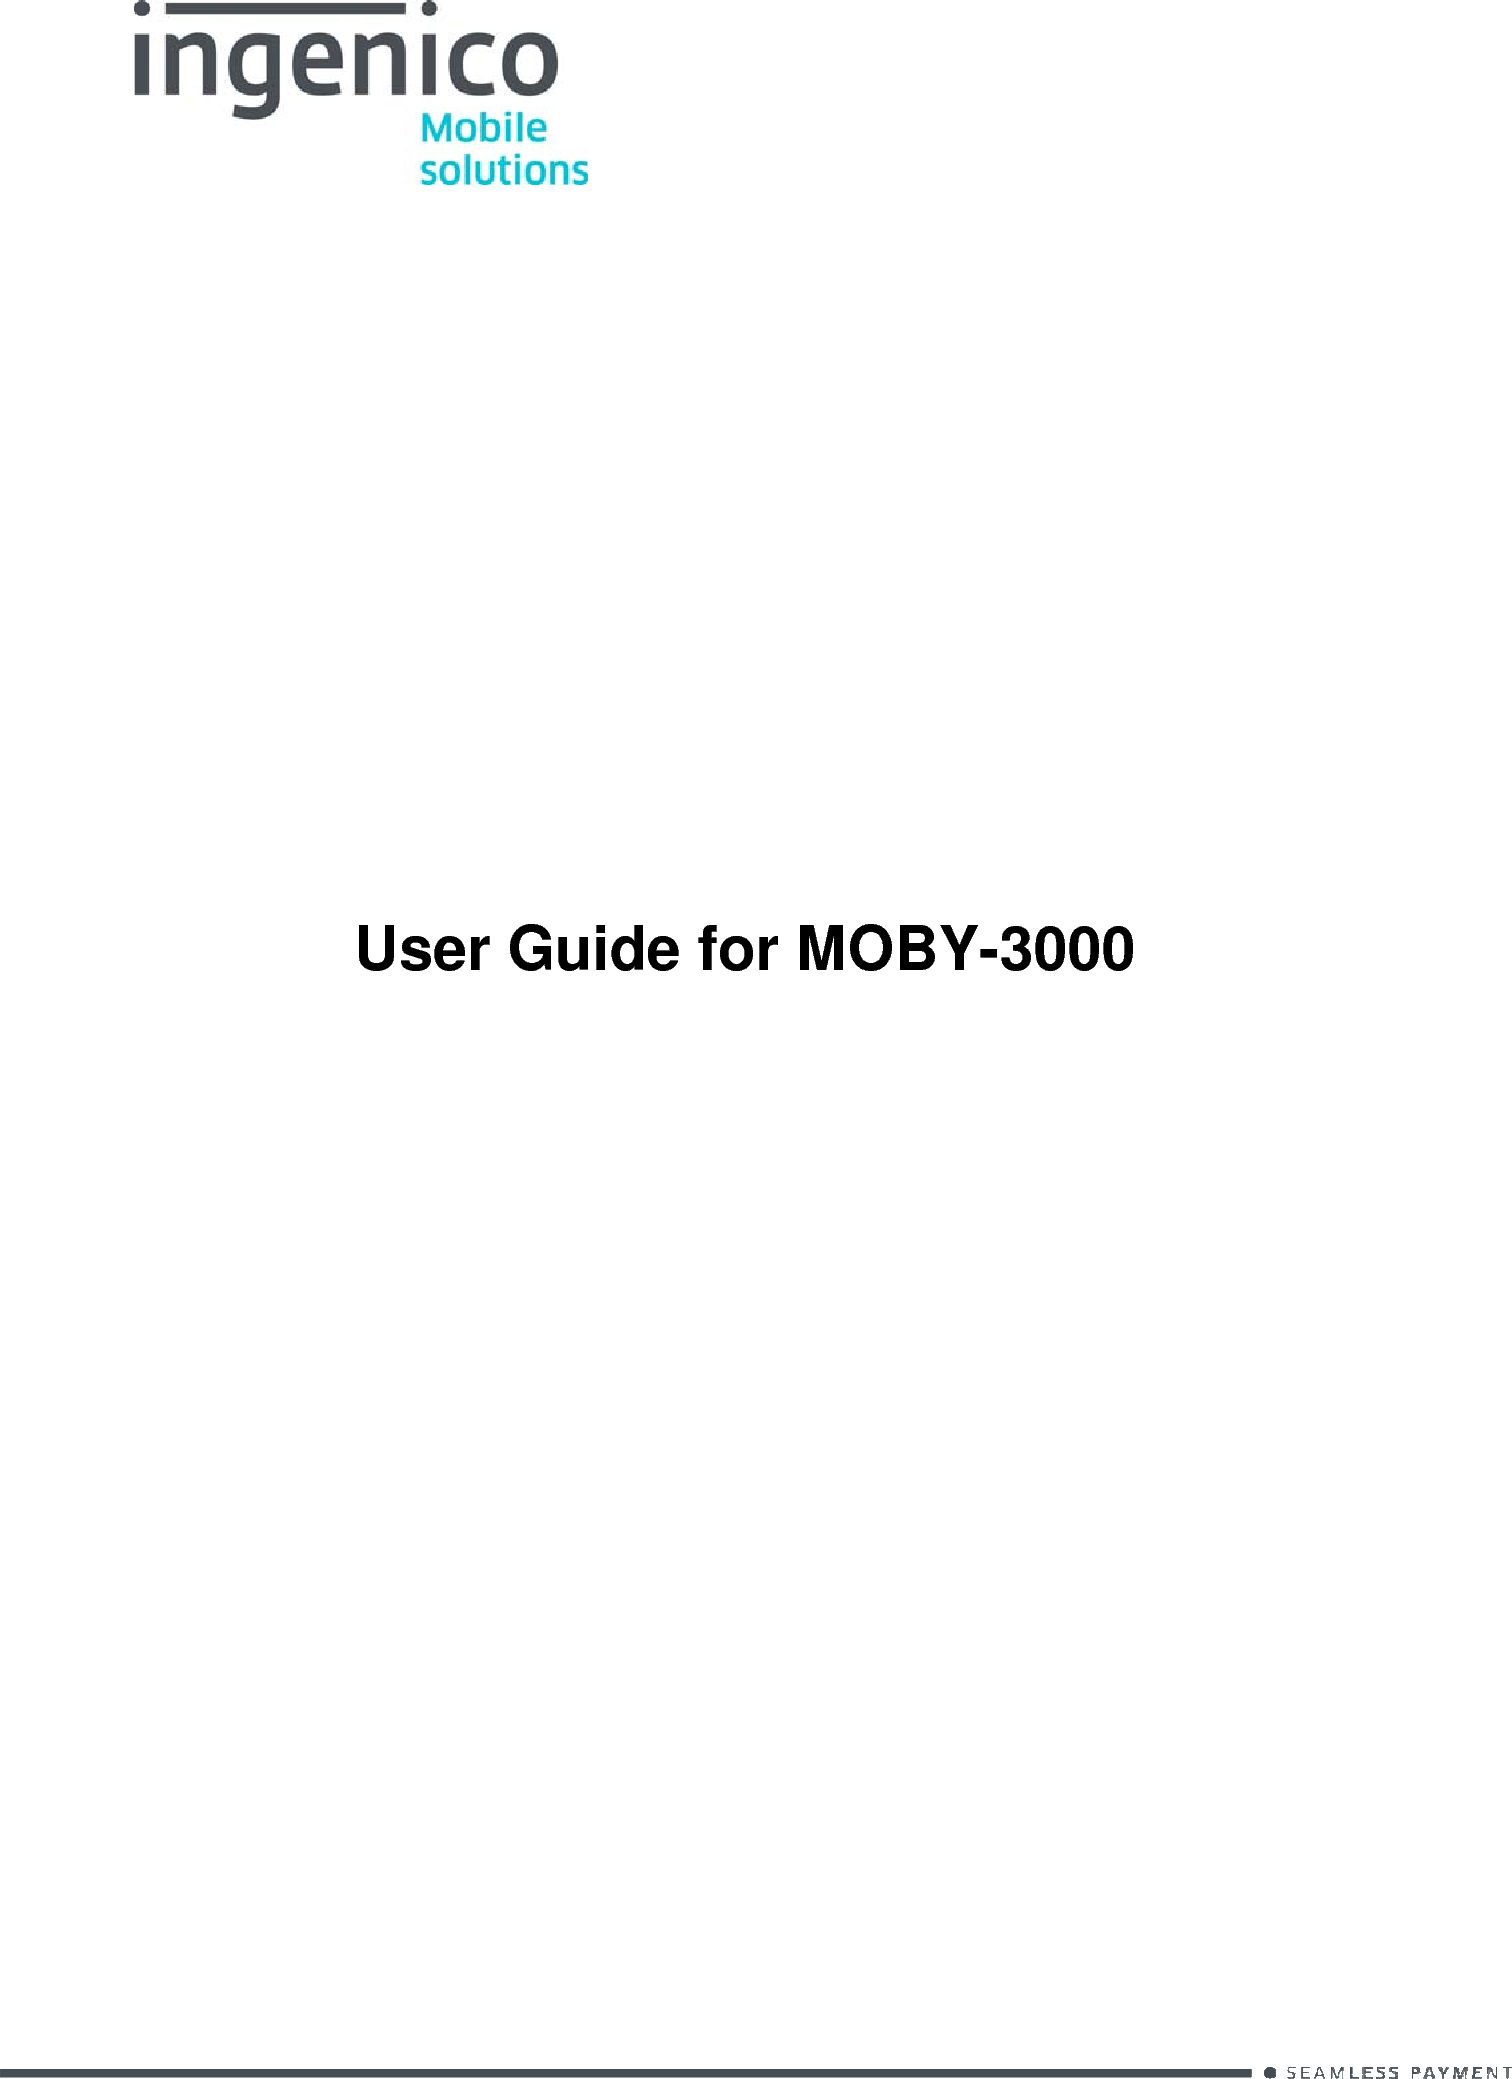  Use     er Gui ide foor MOBY-30000    